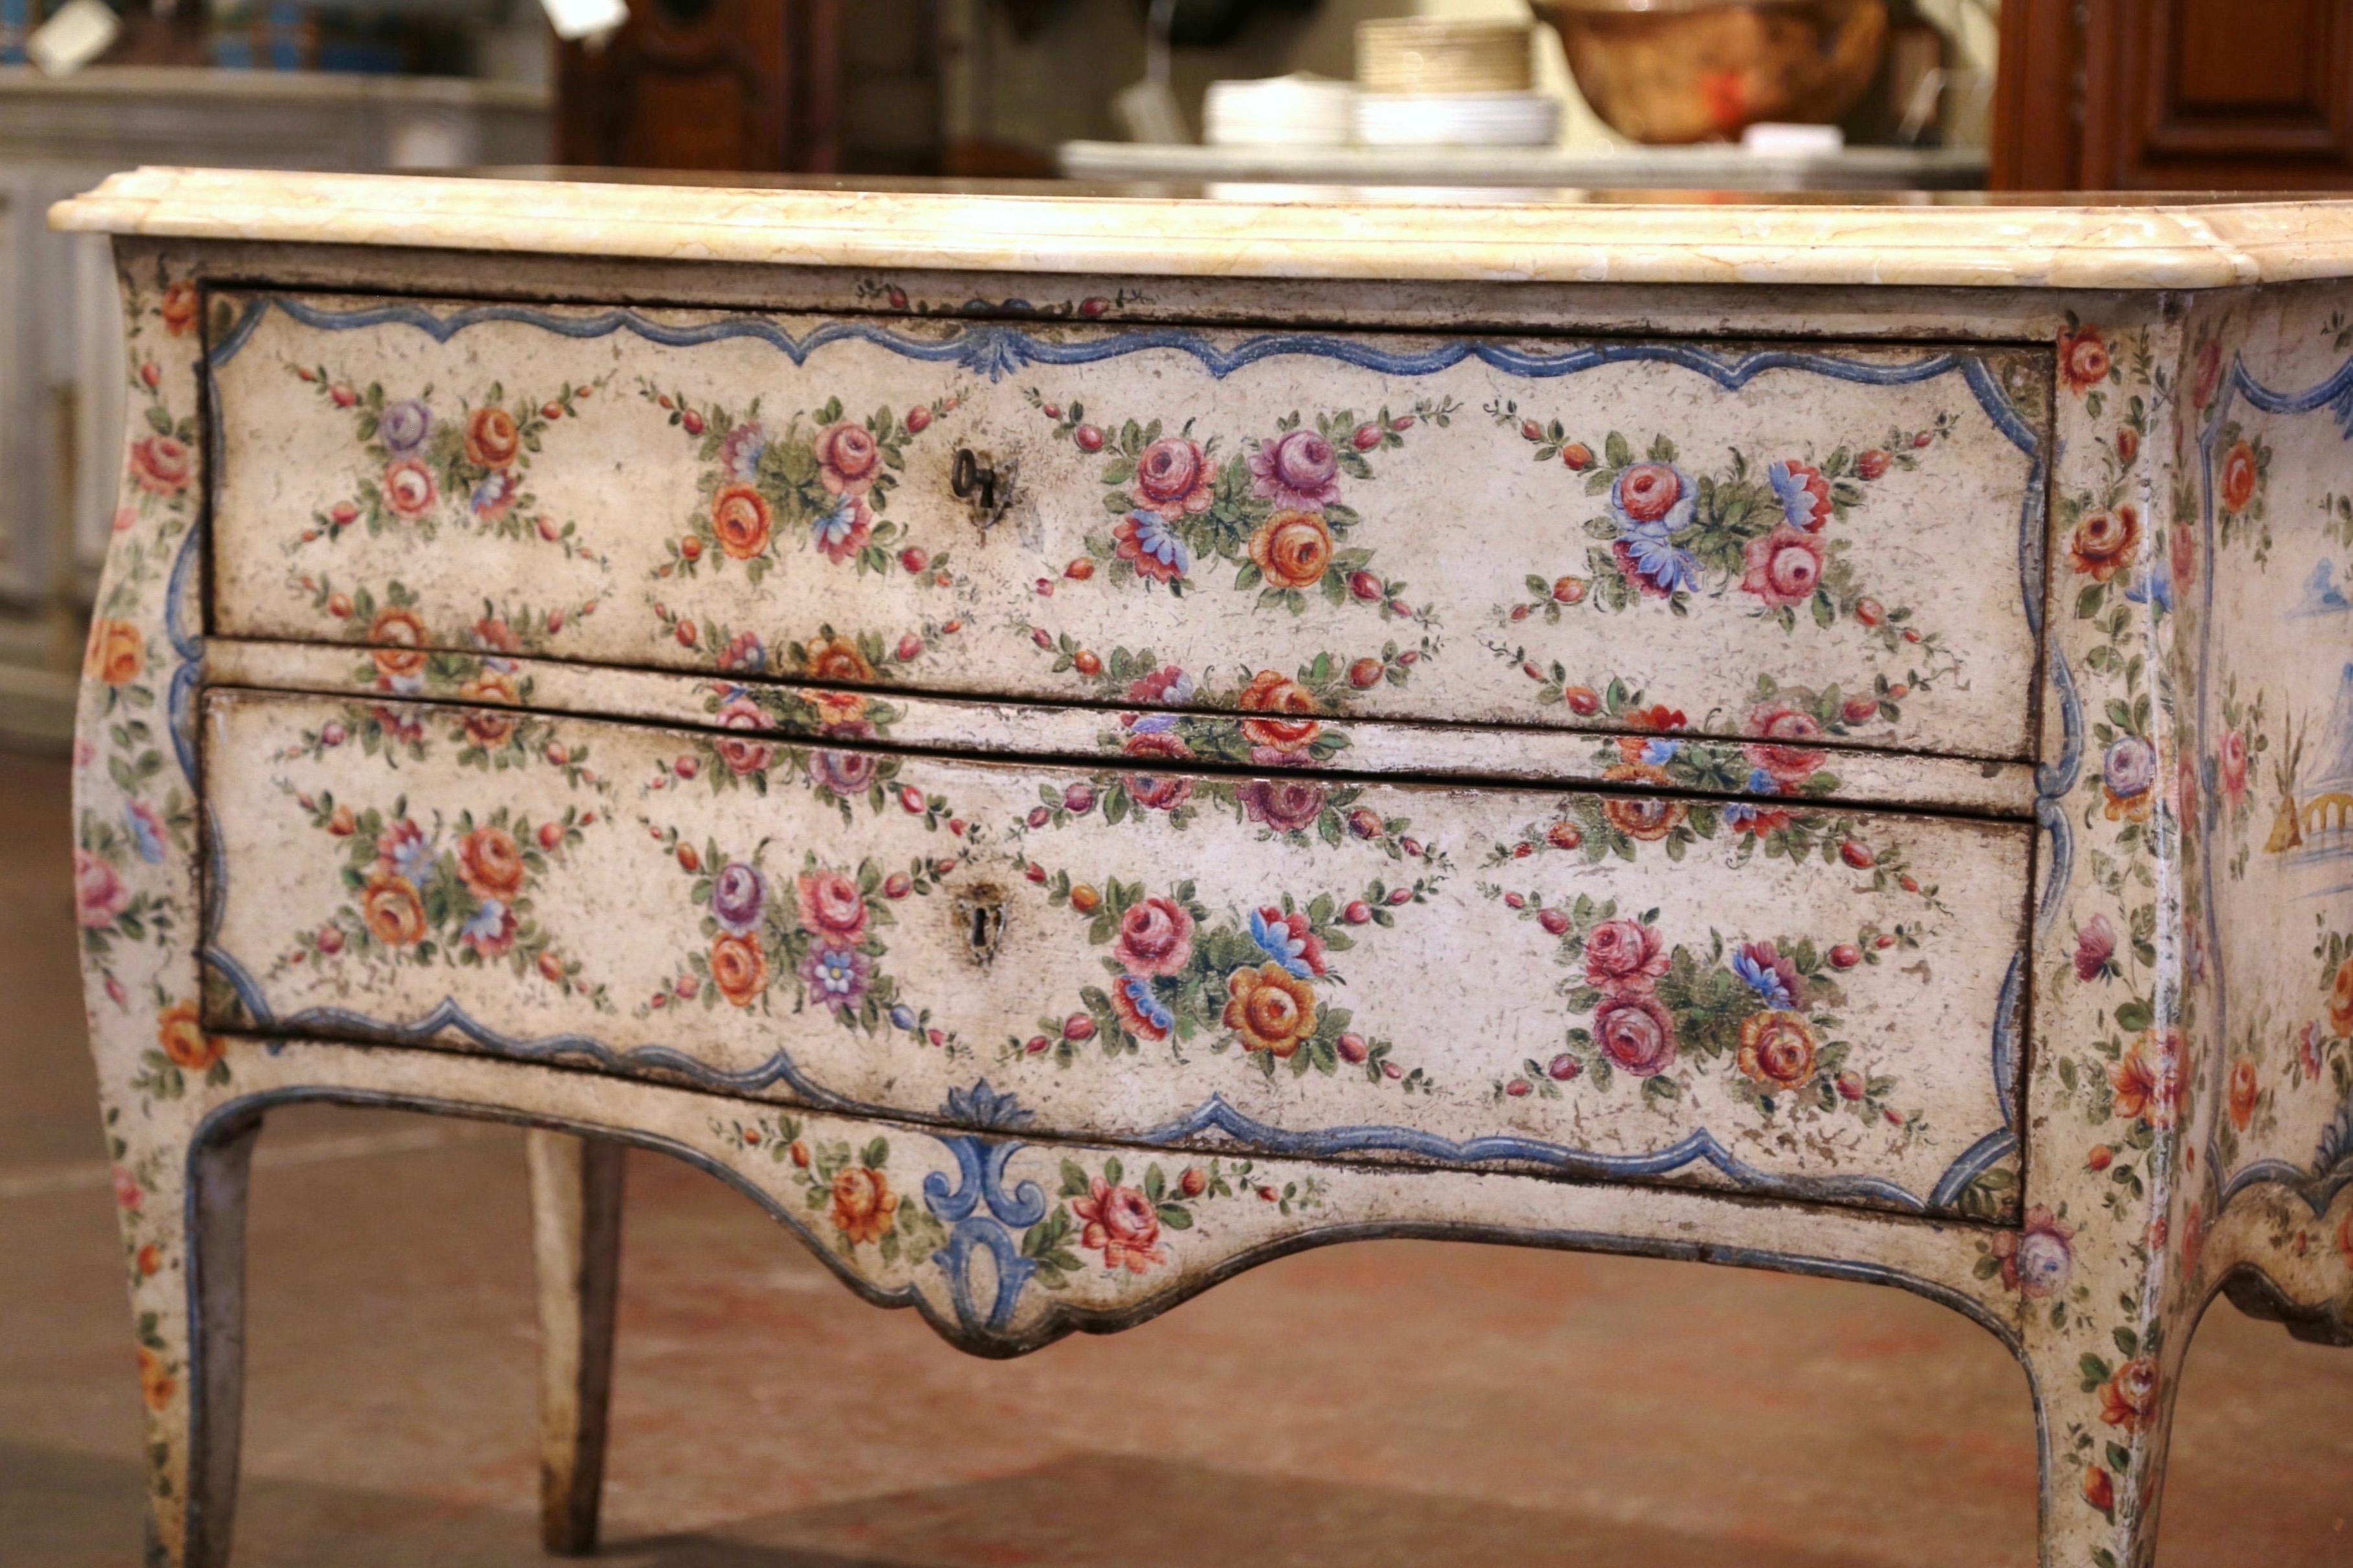 Louis XV Mid-18th Century Italian Venetian Painted Bombe Chest of Drawers with Marble Top